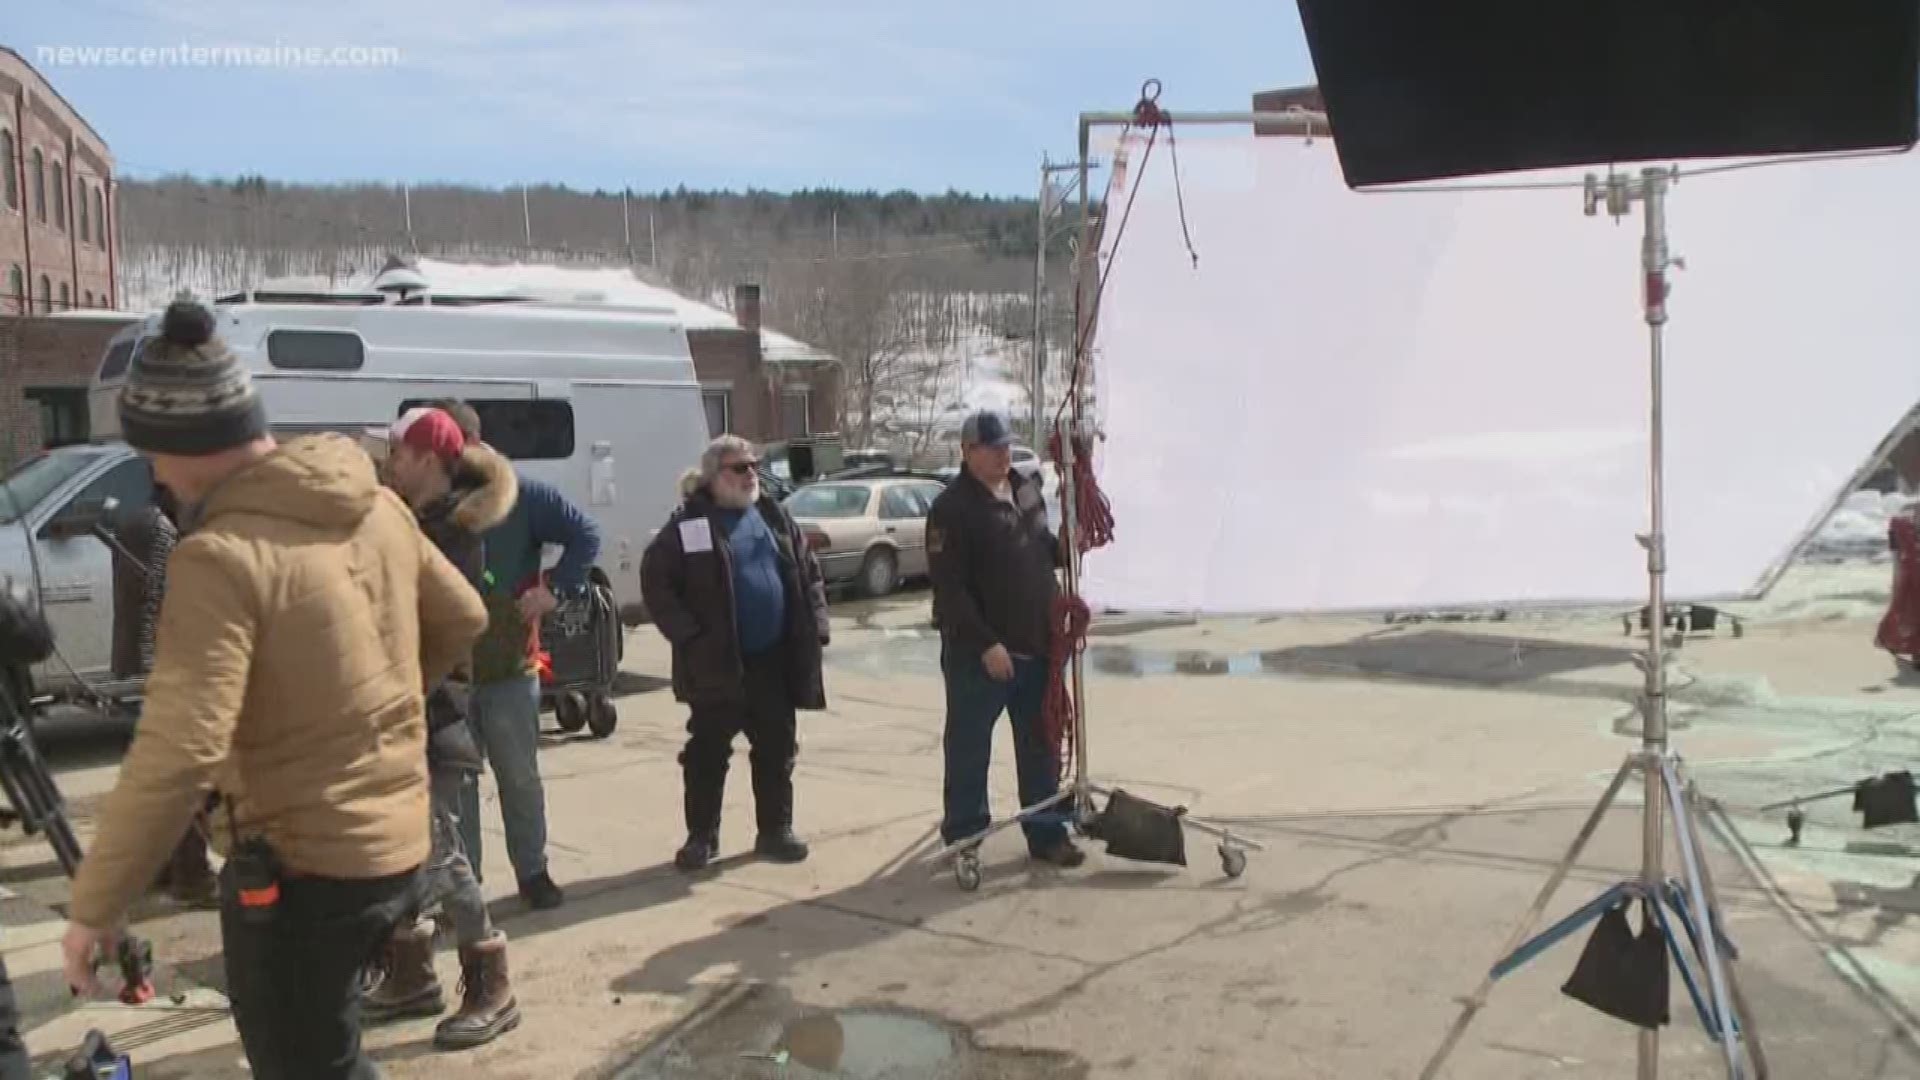 A look behind the scenes of an Independent film based in, and shot in Maine.